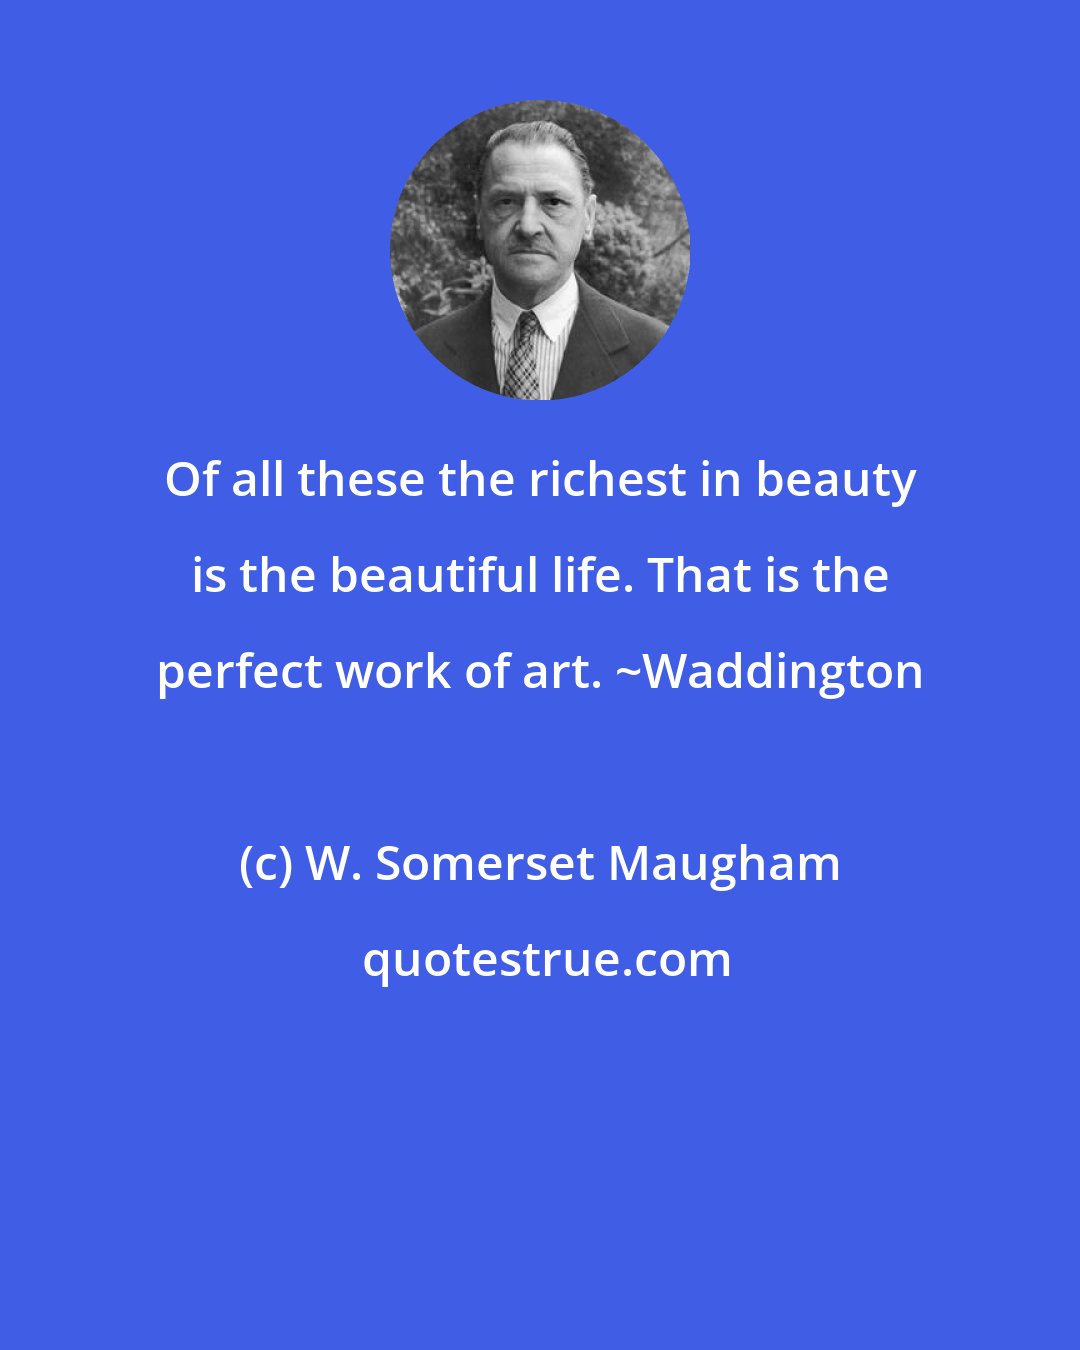 W. Somerset Maugham: Of all these the richest in beauty is the beautiful life. That is the perfect work of art. ~Waddington